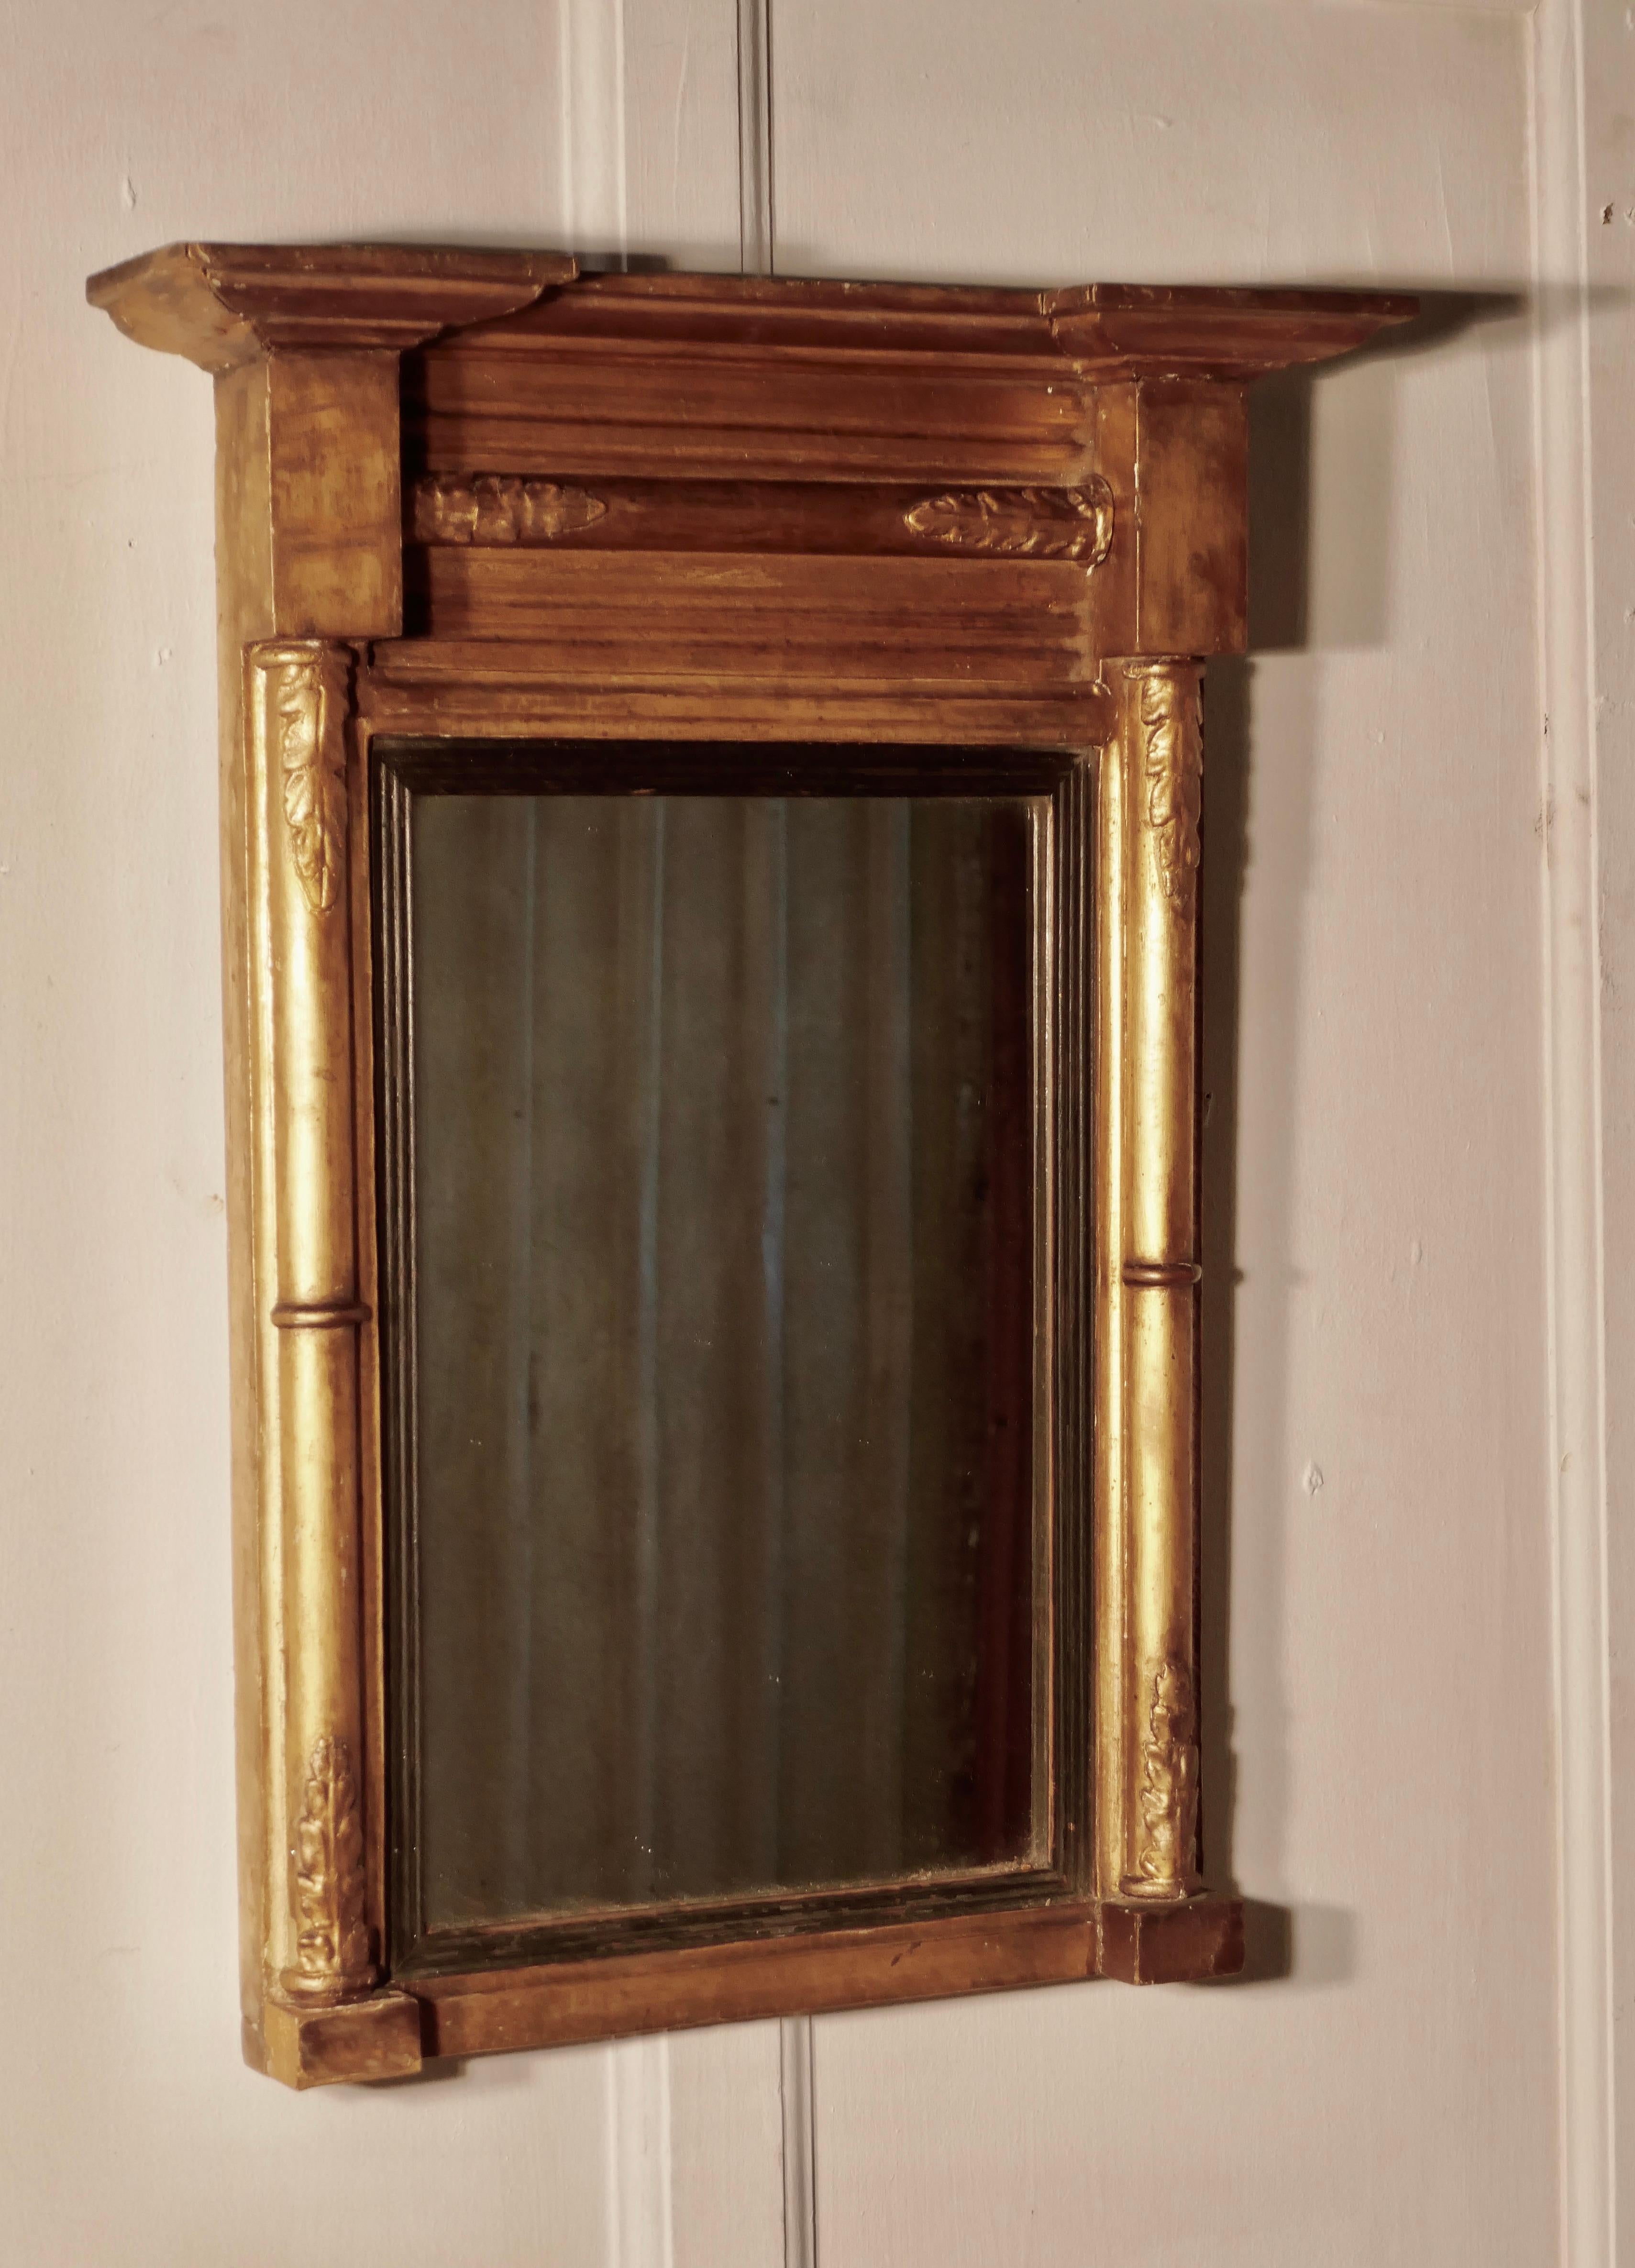 Small Napoleon III French carved gilt wall mirror

This is an elegant French mirror, the Frame is decorated with columns along the top and at each side of the looking glass
The mirror frame is in age darkened gold, the looking glass is original,